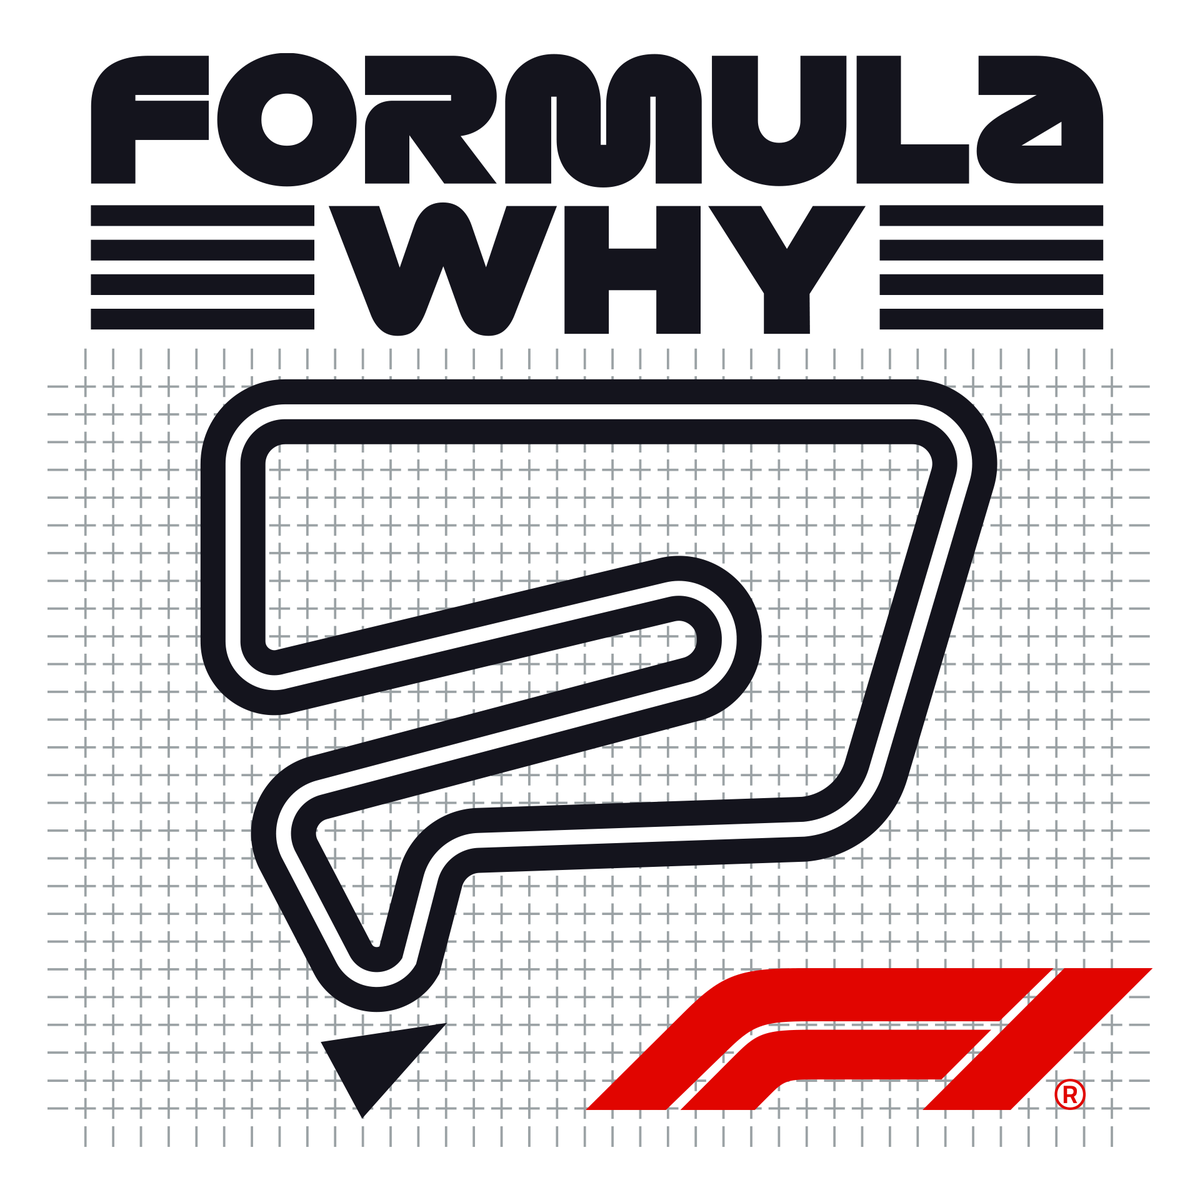 A very exciting day today as #FormulaWhy joins the brilliant #F1BeyondTheGrid and #F1Nation in the Official F1 Podcast garage!

🎧TRAILER & SUBSCRIBE podfollow.com/formula-why